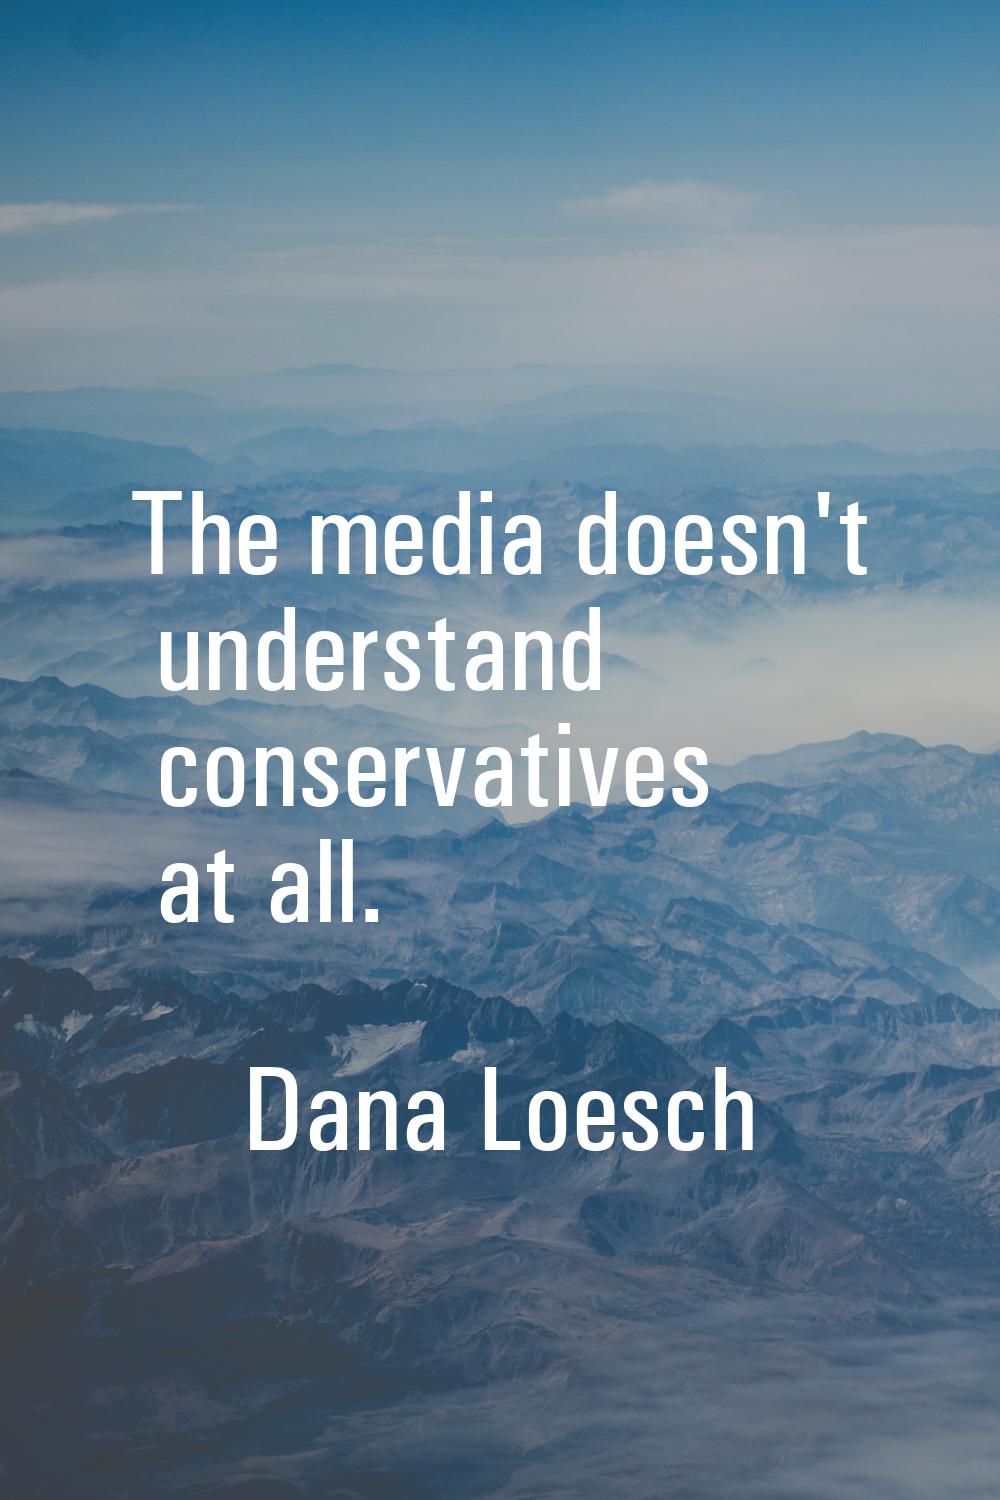 The media doesn't understand conservatives at all.